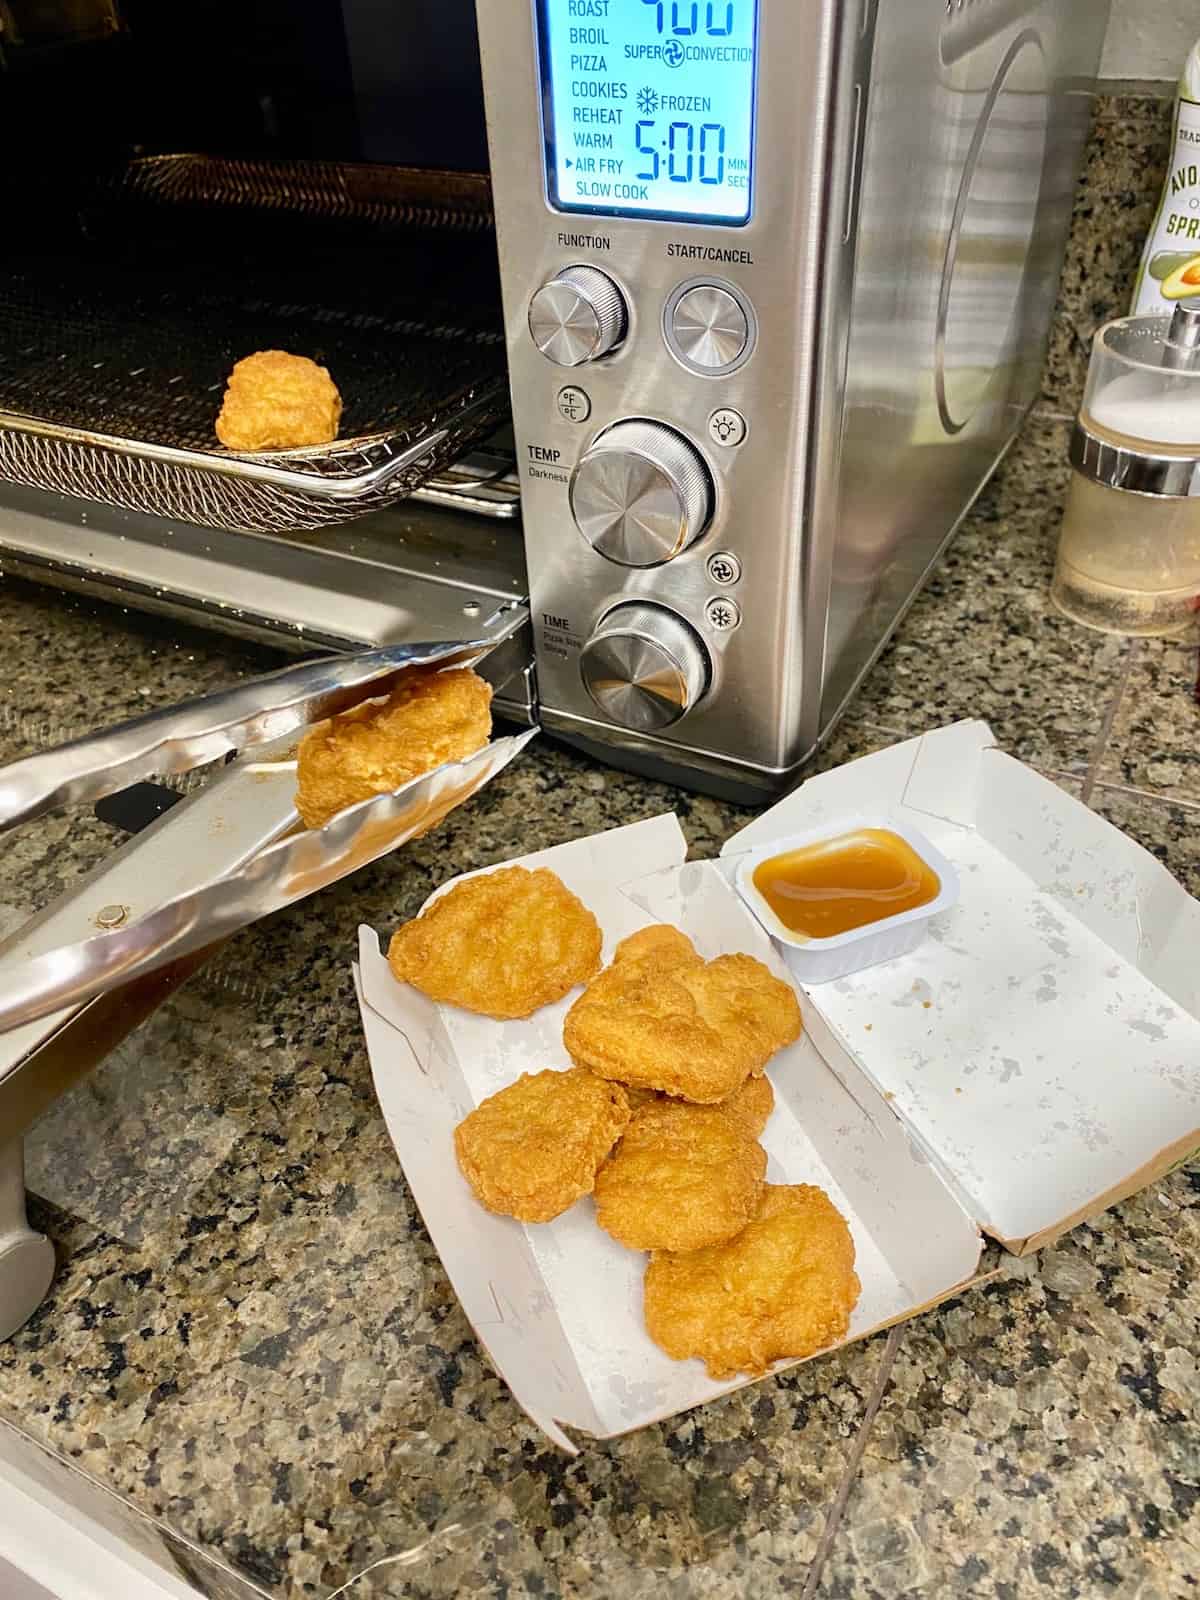 Using tongs to remove hot McNuggets from air fryer.